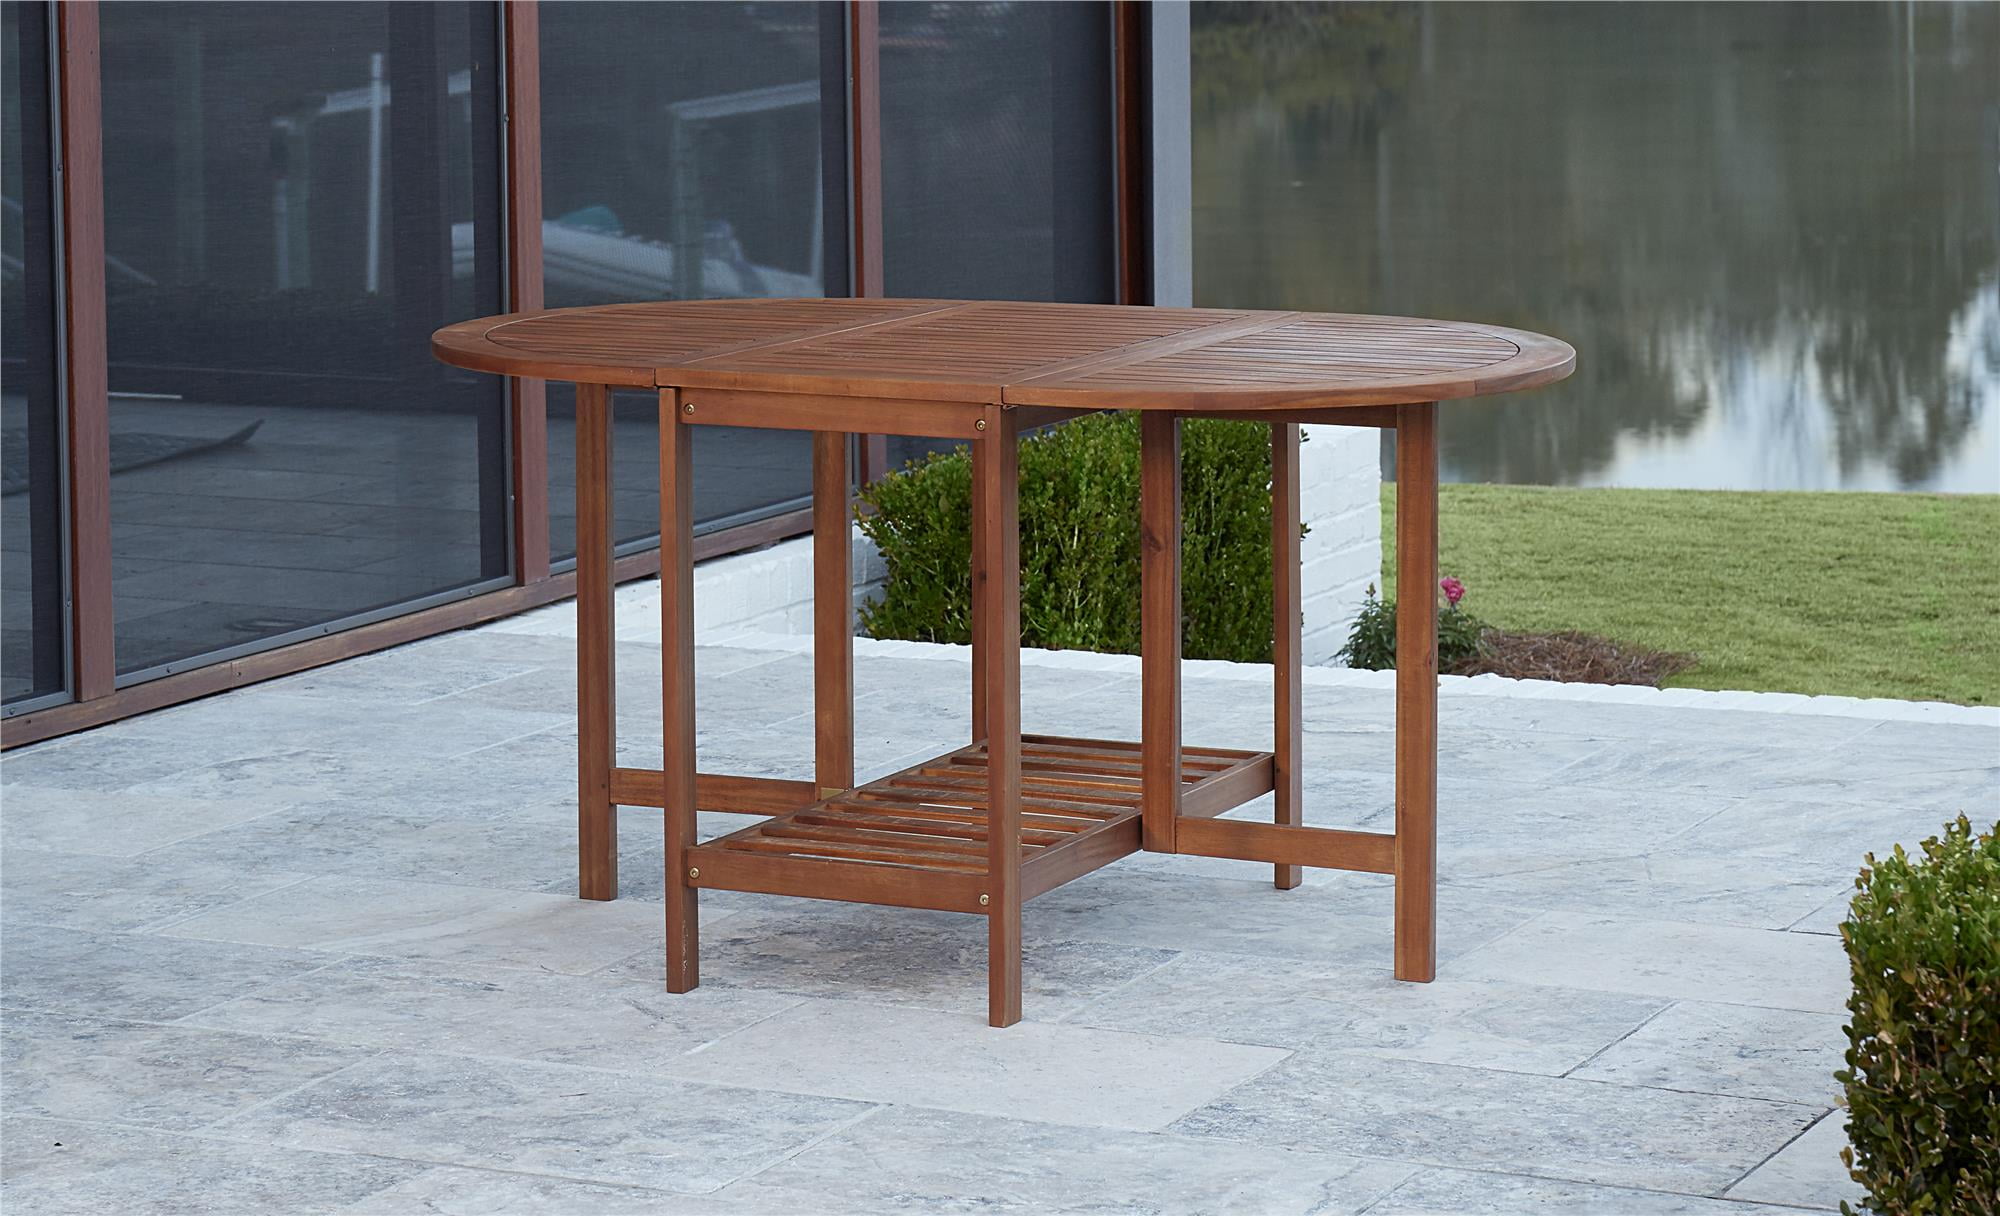 COSCO Outdoor Living Acacia Wood Folding Drop Leaf Patio Dining Table